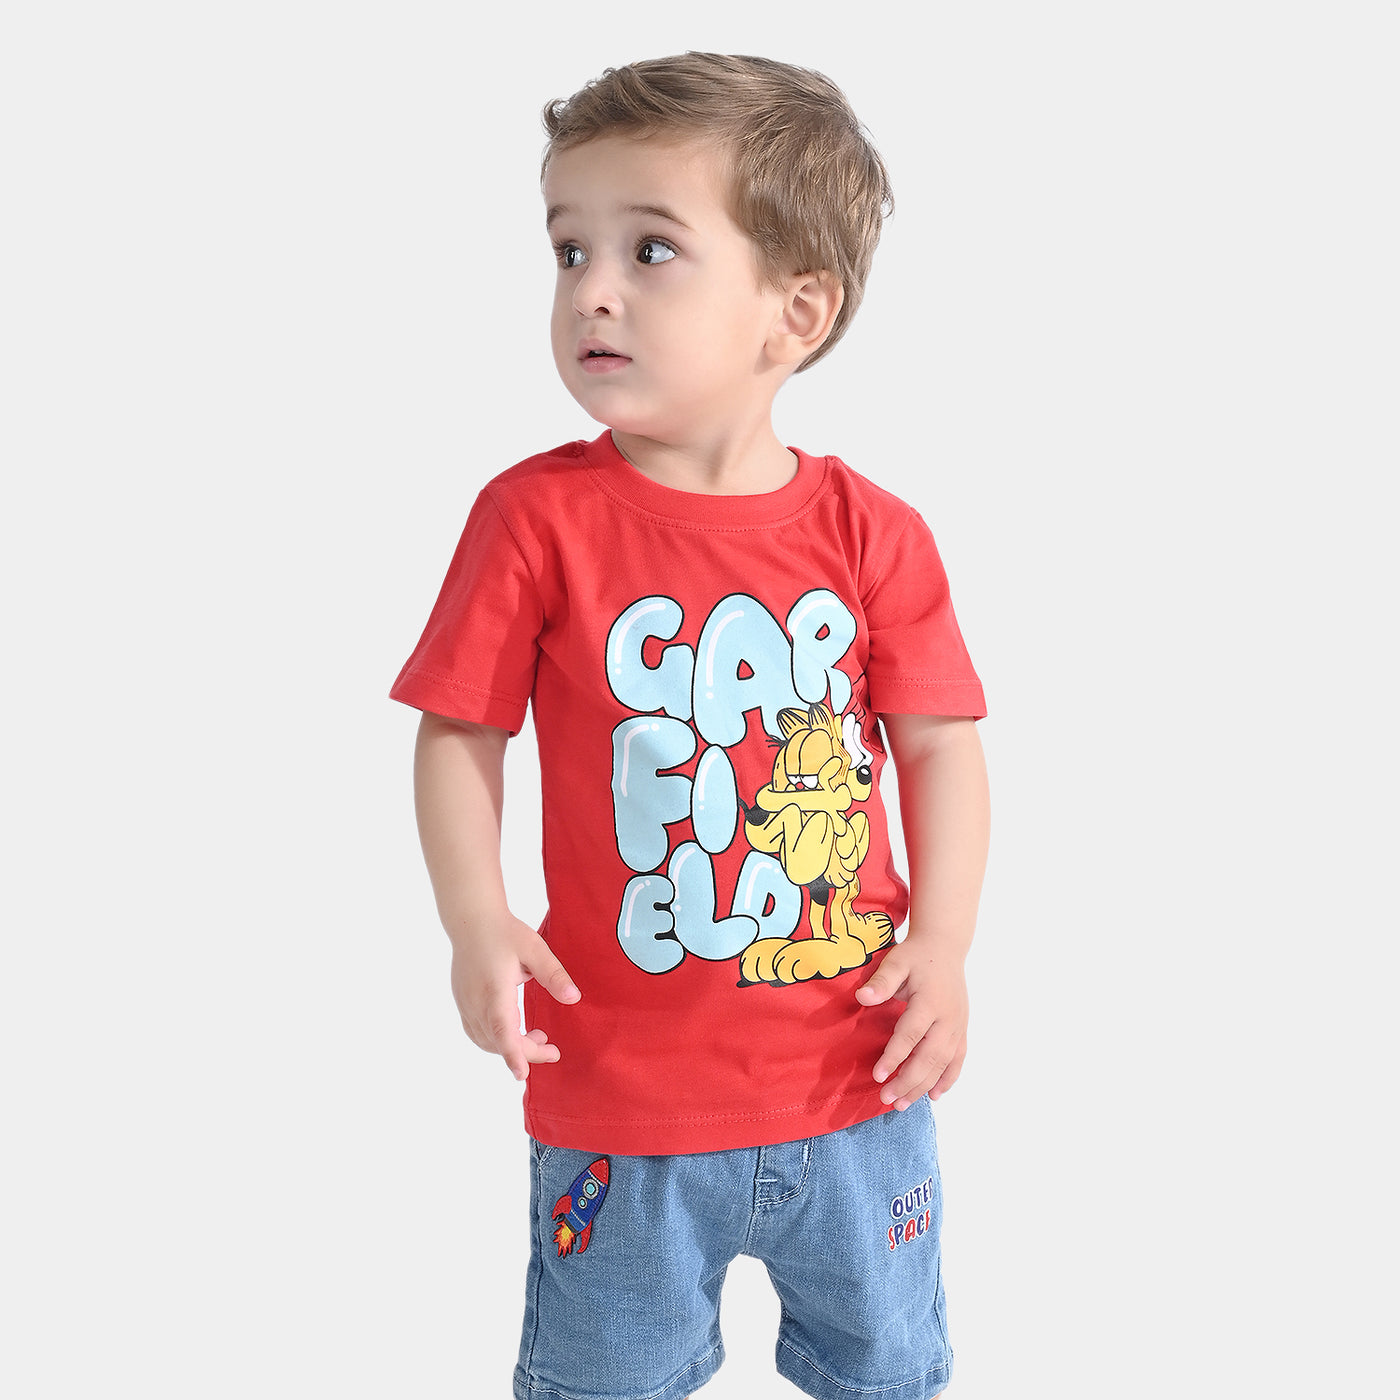 Infant Boys Cotton Jersey Round Neck T-Shirt - Red